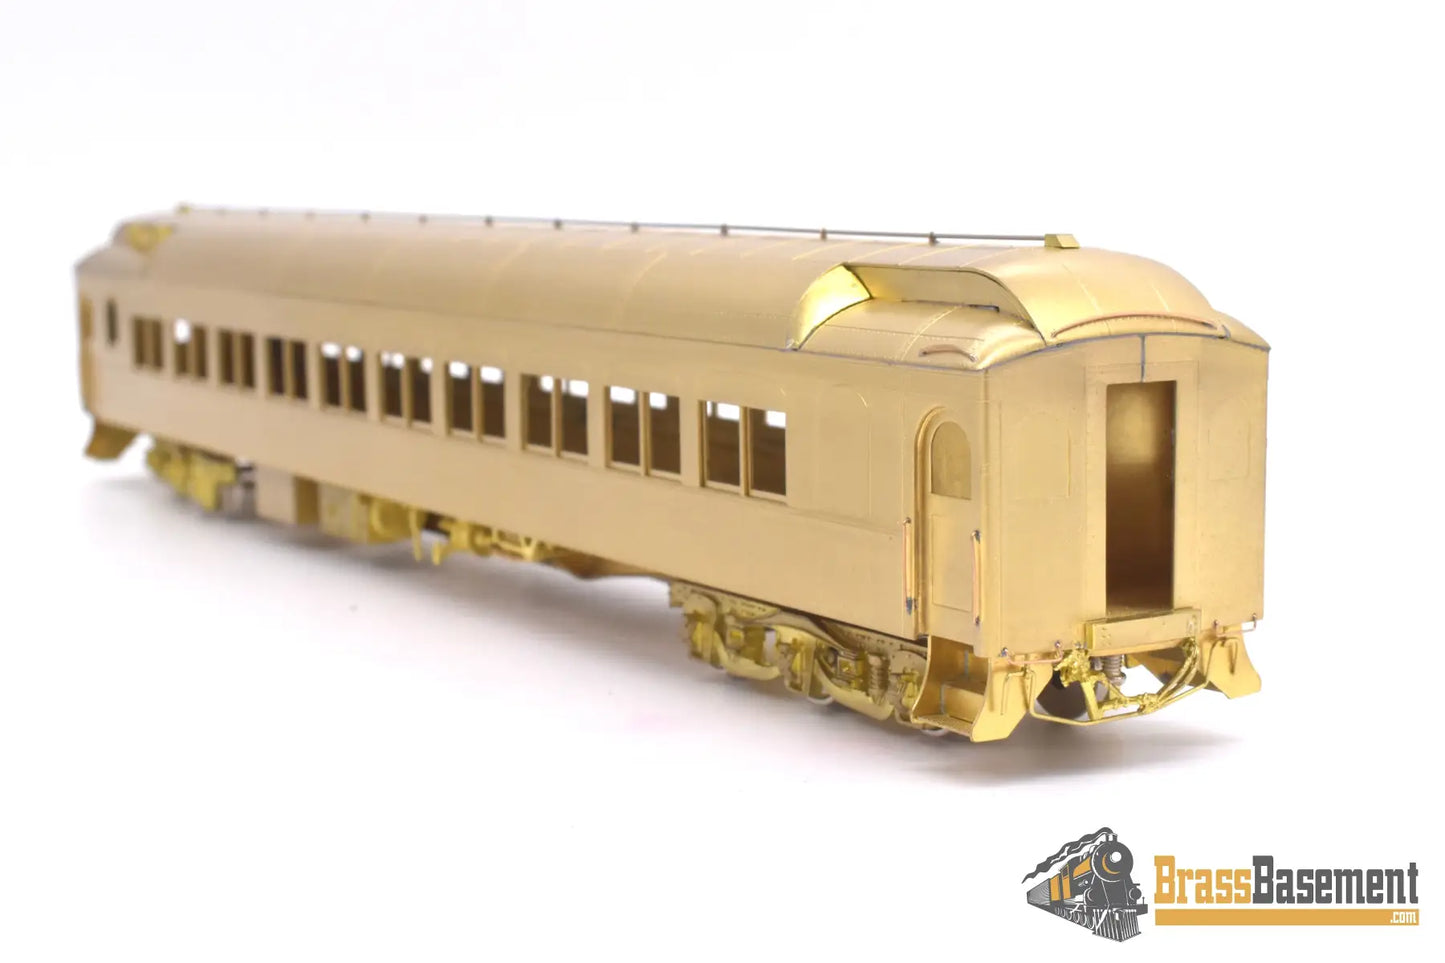 Ho Brass - W&R Northern Pacific Arch Window Coach #1206 - 1227 Unpainted Passenger